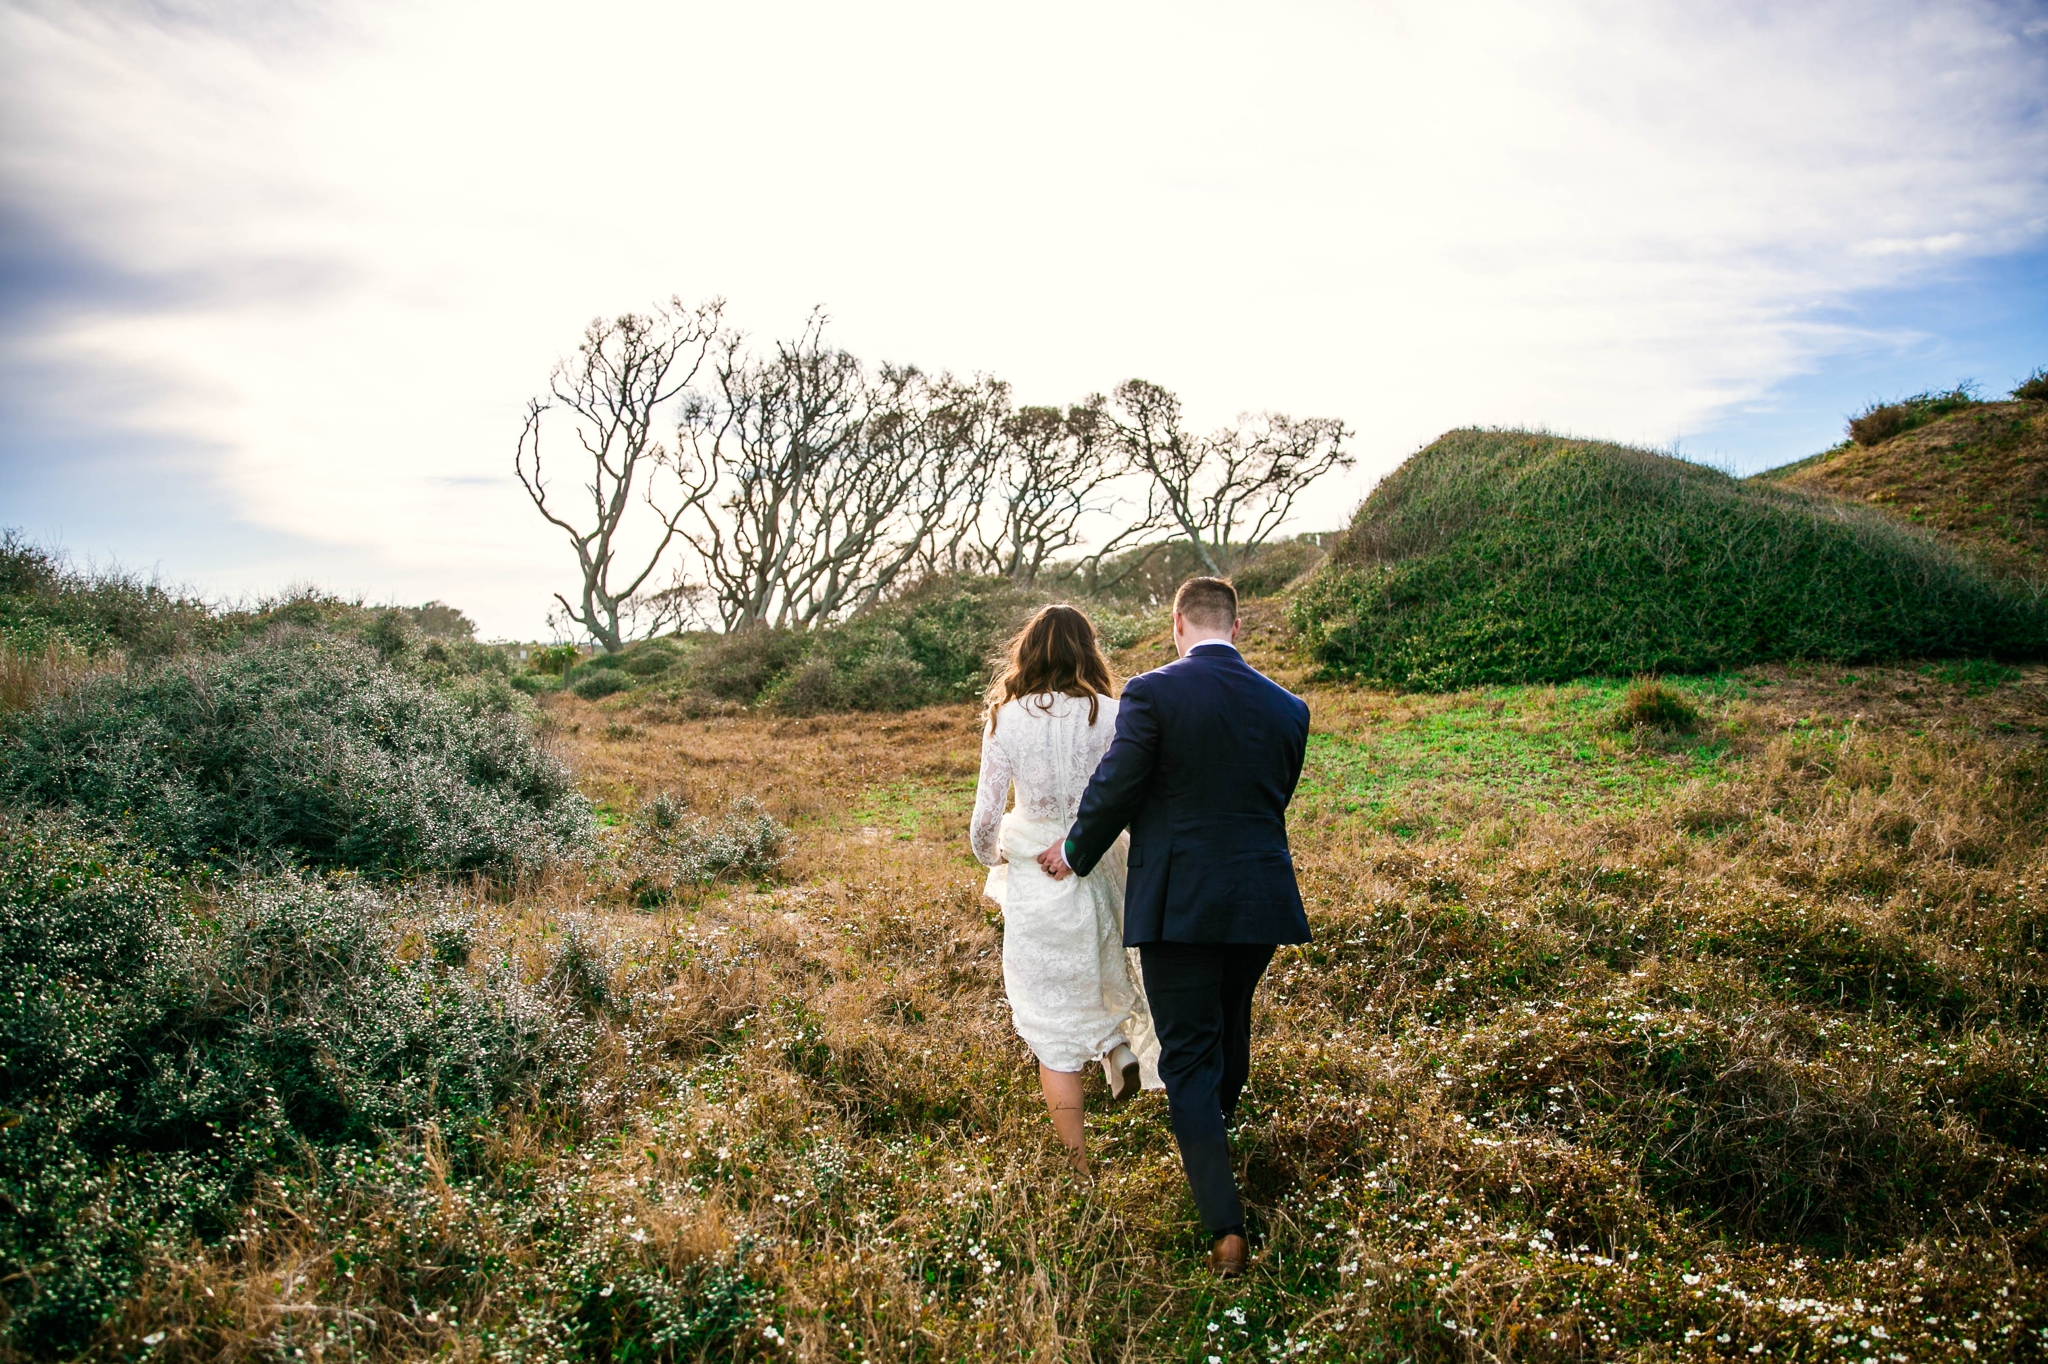 Groom holding brides dress while walking in Lush Green Hills - Beach Elopement Photography - wedding dress by asos with purple and pink flowers and navy suit - oahu hawaii wedding photographer